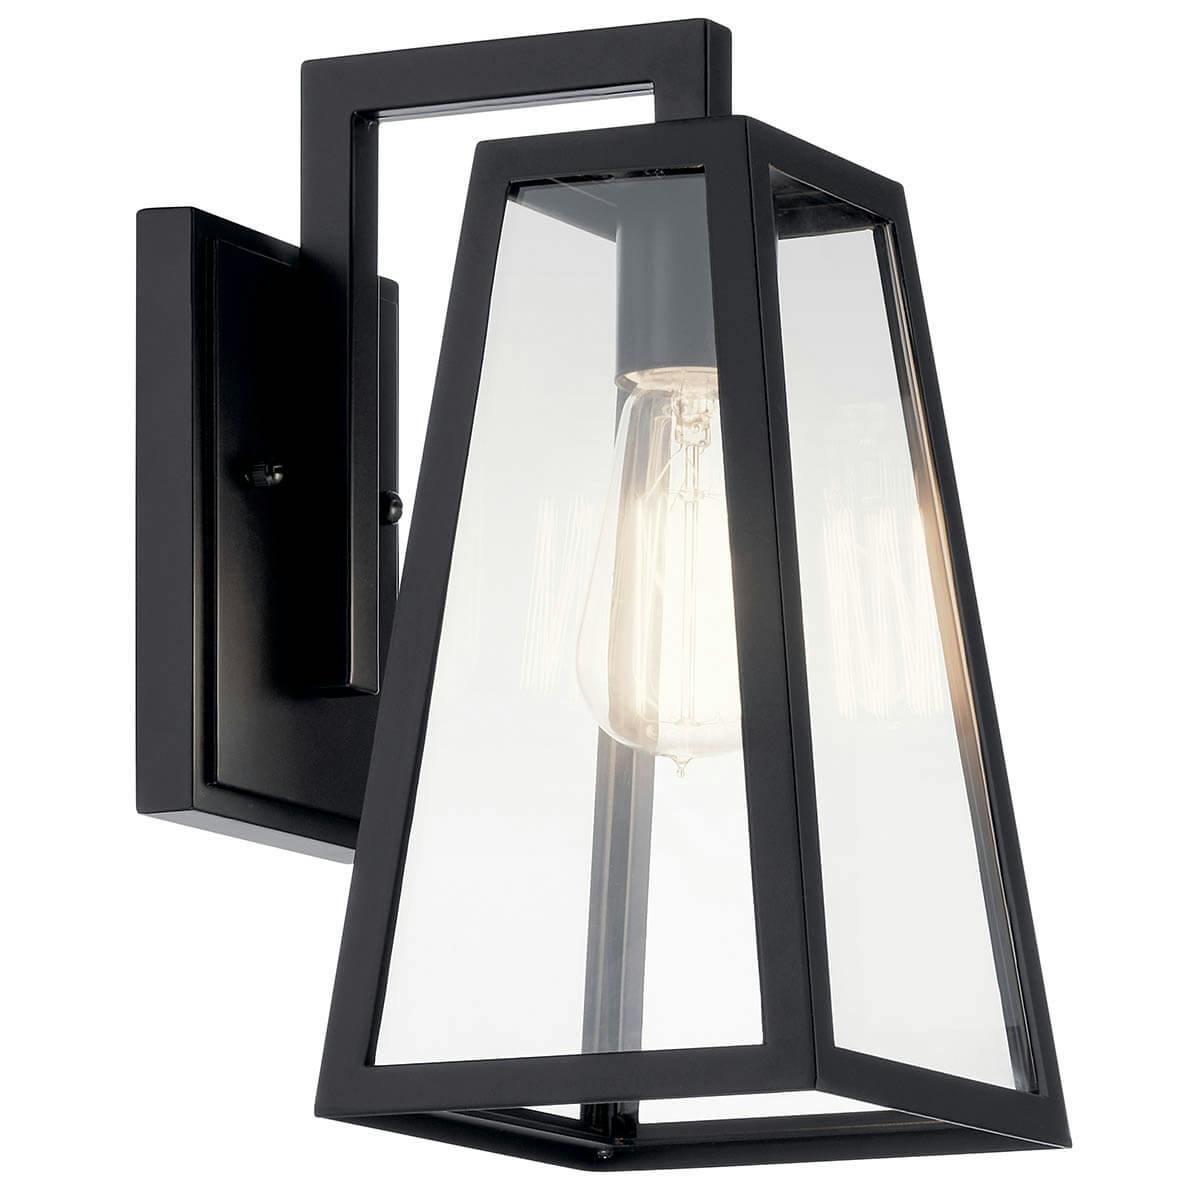 The Delison 11.5" 1 Light Wall Light Black on a white background